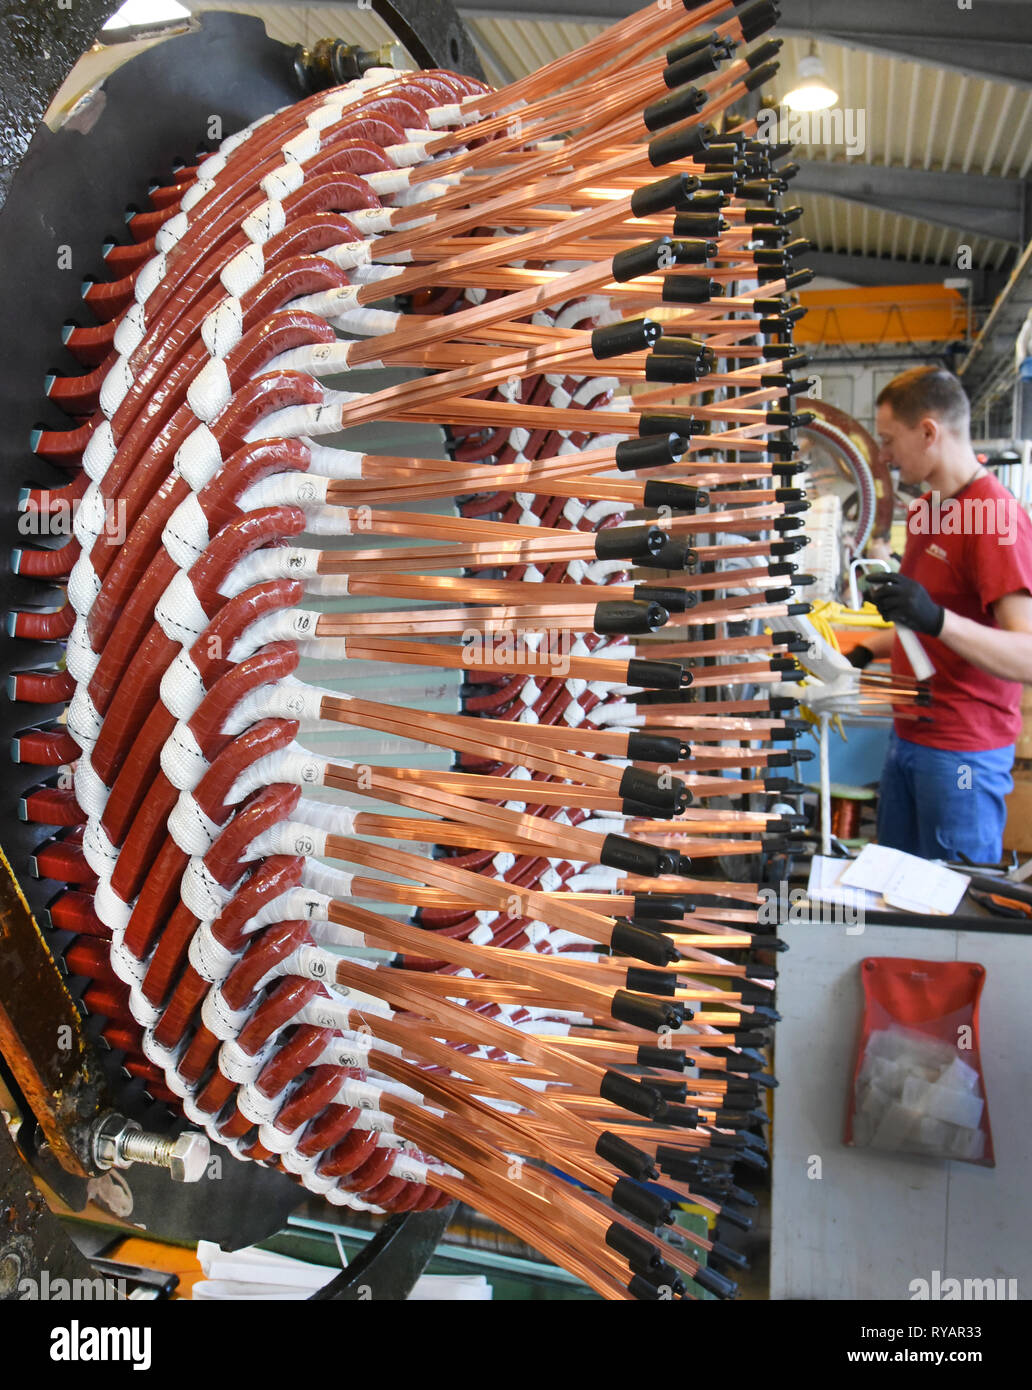 Bitterfeld Wolfen, Germany. 11th Mar, 2019. At Pamo Reparaturwerk GmbH, a company of the Partzsch Döbeln Group, an employee works on stators for electric motors and generators. The parts weighing several tons for electrically rotating machines with an output of 100 kilowatts to 250,000 kilovolt amperes are used worldwide in steel mills, power stations, sugar factories and in engine and generator end manufacturers. The company specializes primarily in the repair, maintenance and new manufacture of electrical machines. Credit: Waltraud Grubitzsch/dpa-Zentralbild/ZB/dpa/Alamy Live News Stock Photo